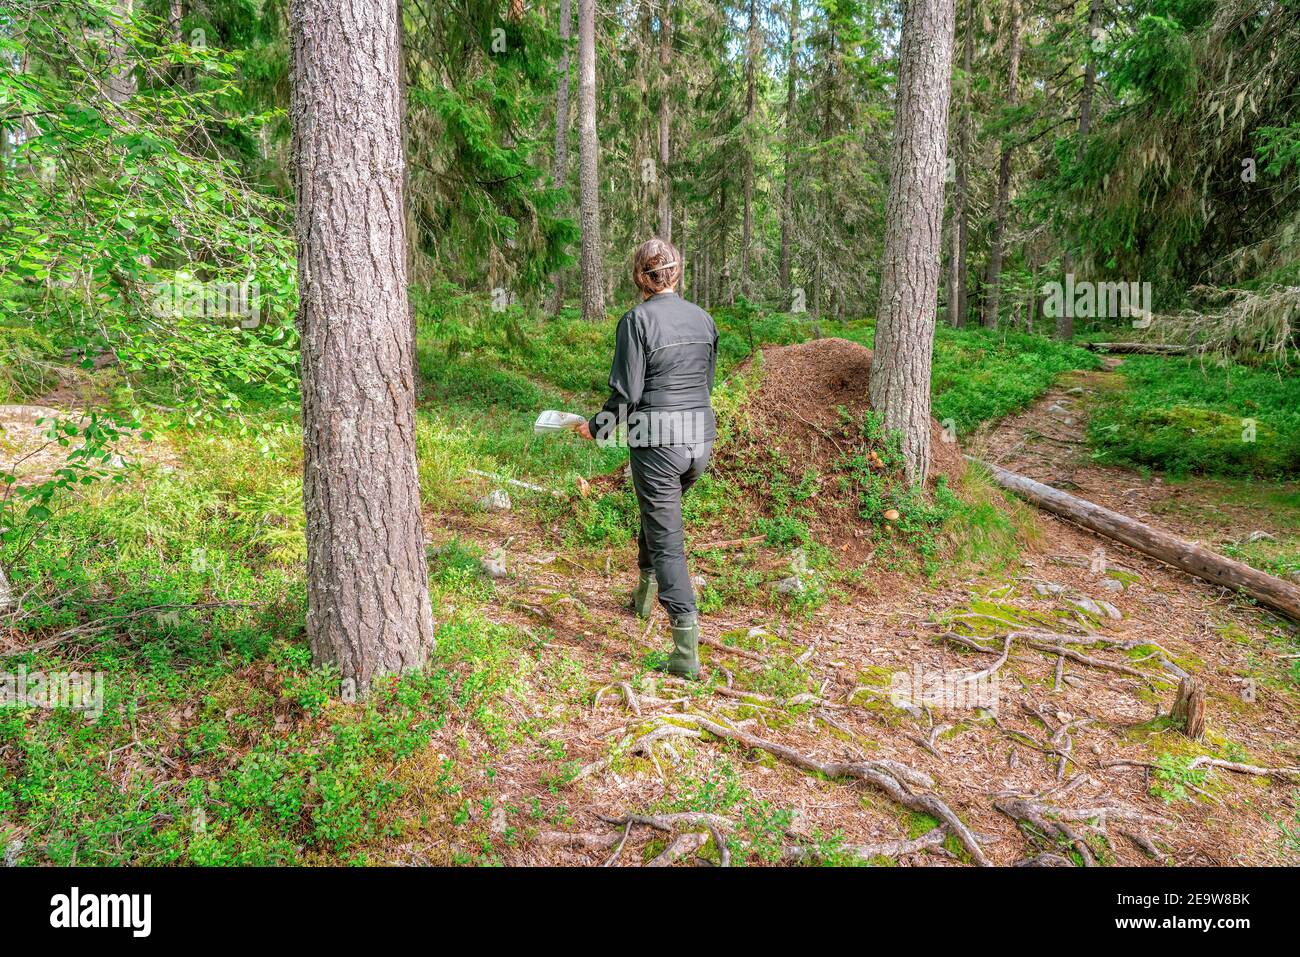 Cute middle aged Caucasian women wearing black sportswear walking with map in pine tree forest during exercise in outdoor orienteering, Sweden, hobby Stock Photo